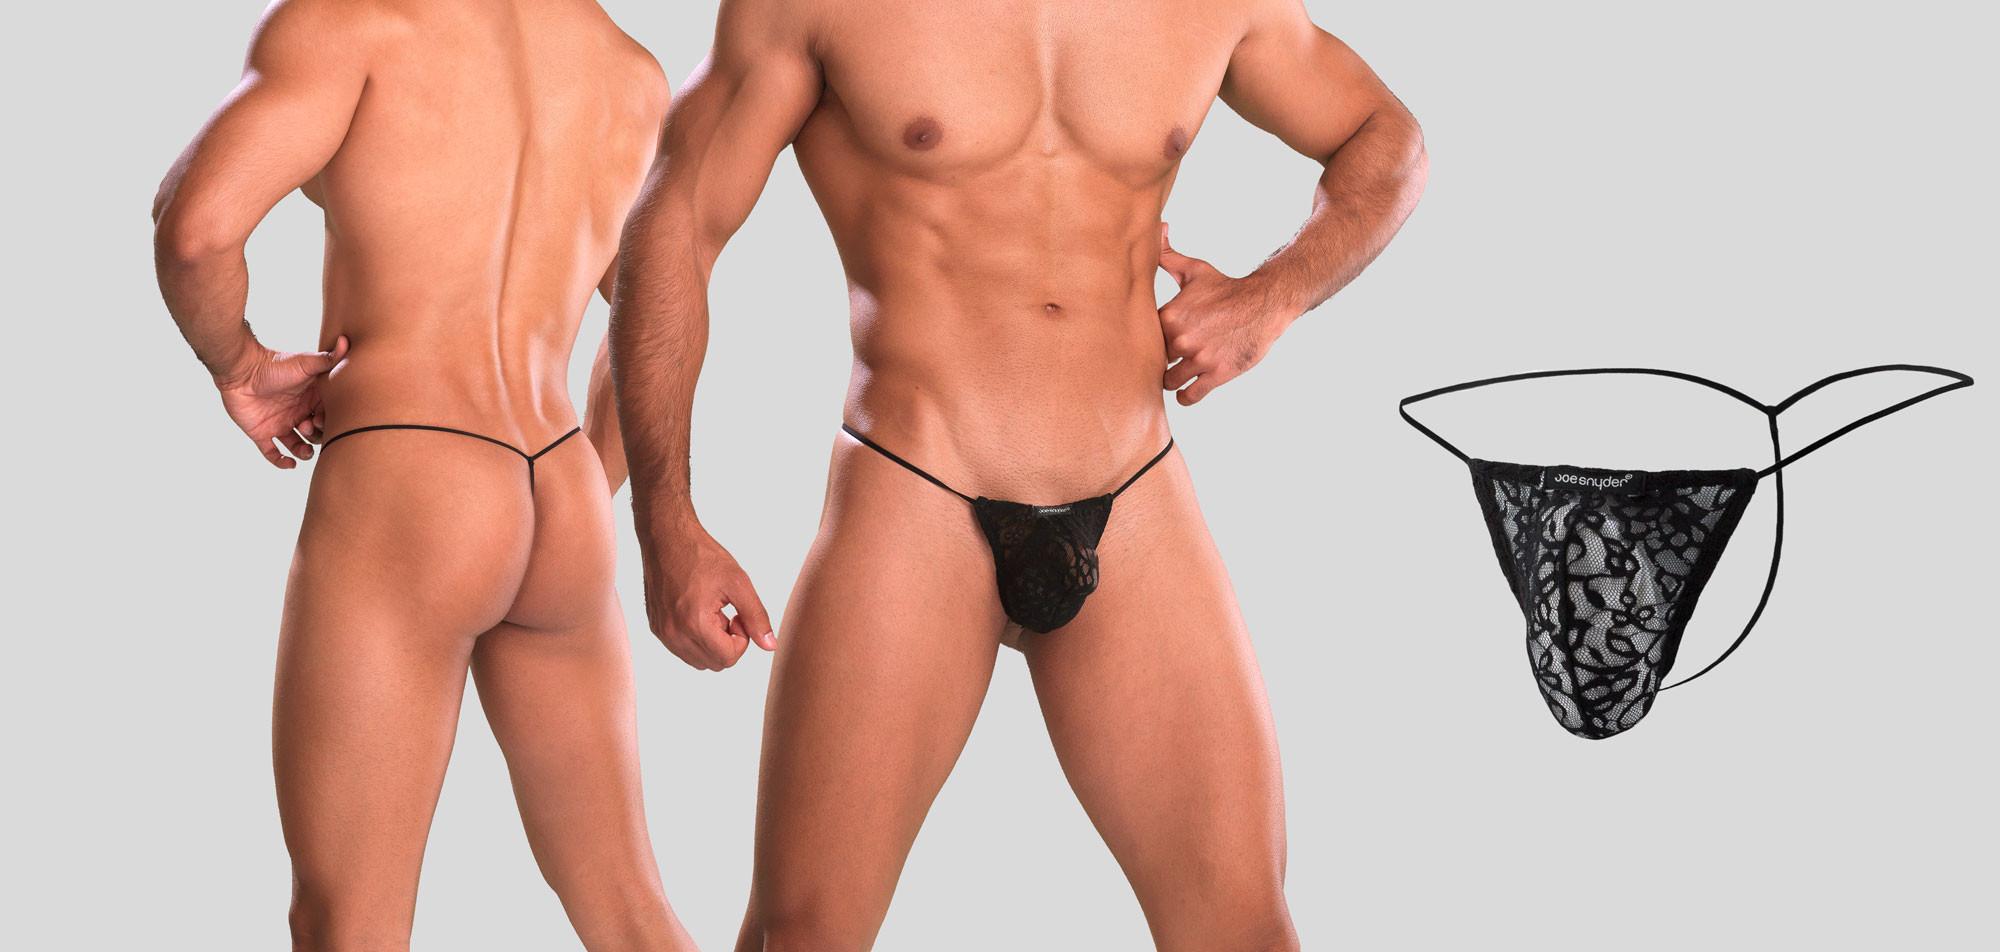 Joe Snyder Shining G-String Lace 02, color Nee